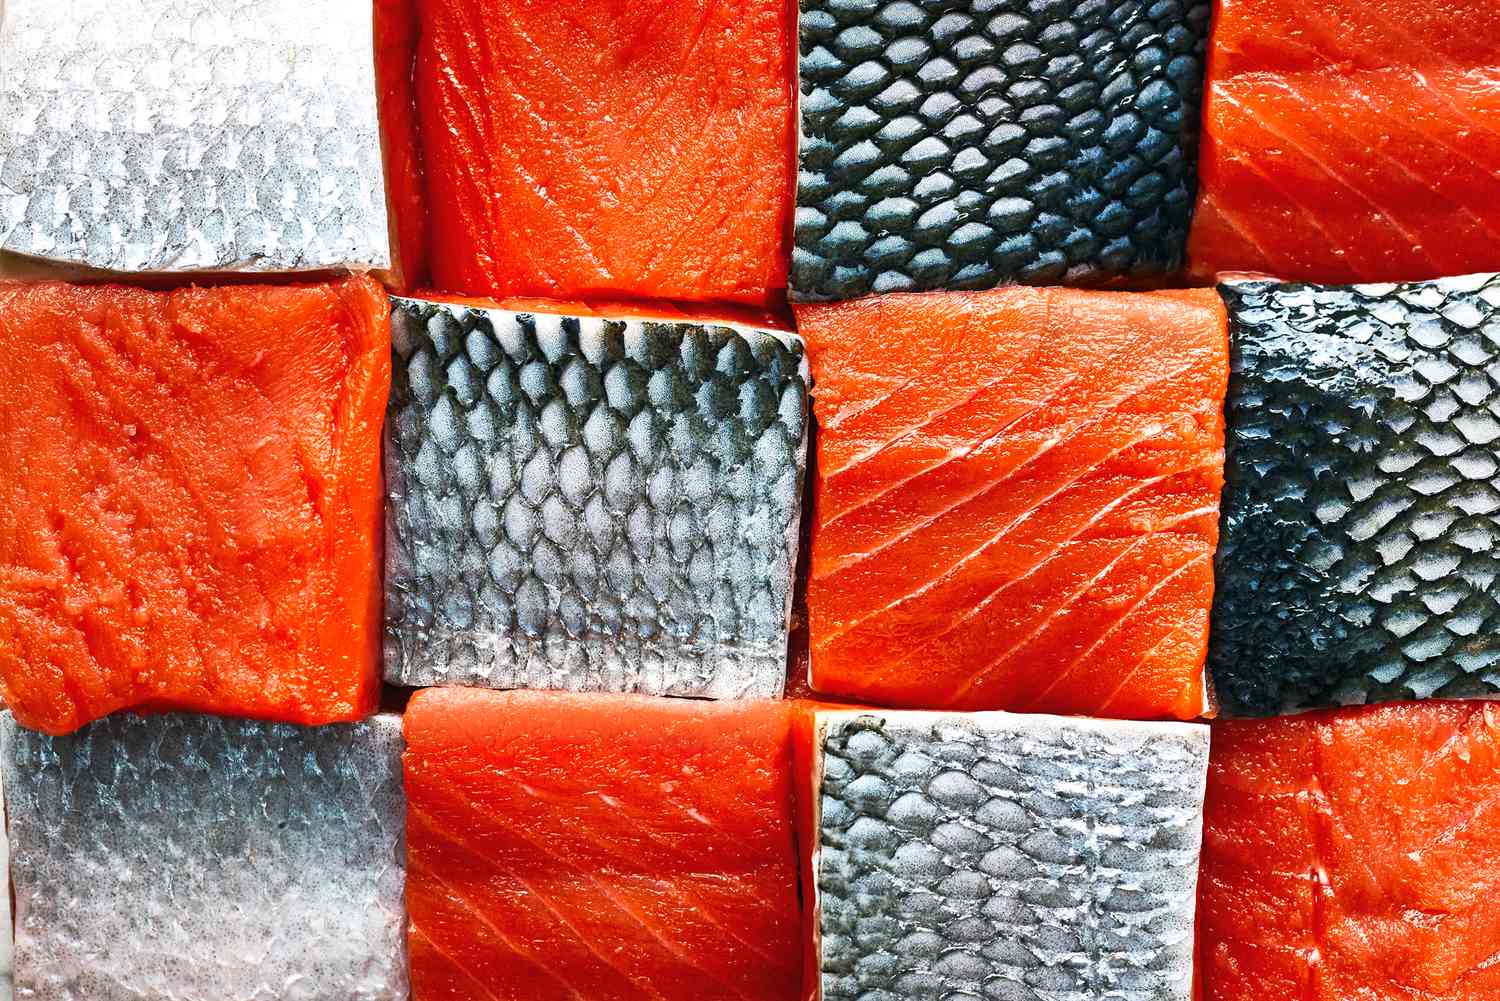 Now's the Time to Order Mass Quantities of Wild Alaskan Salmon Online